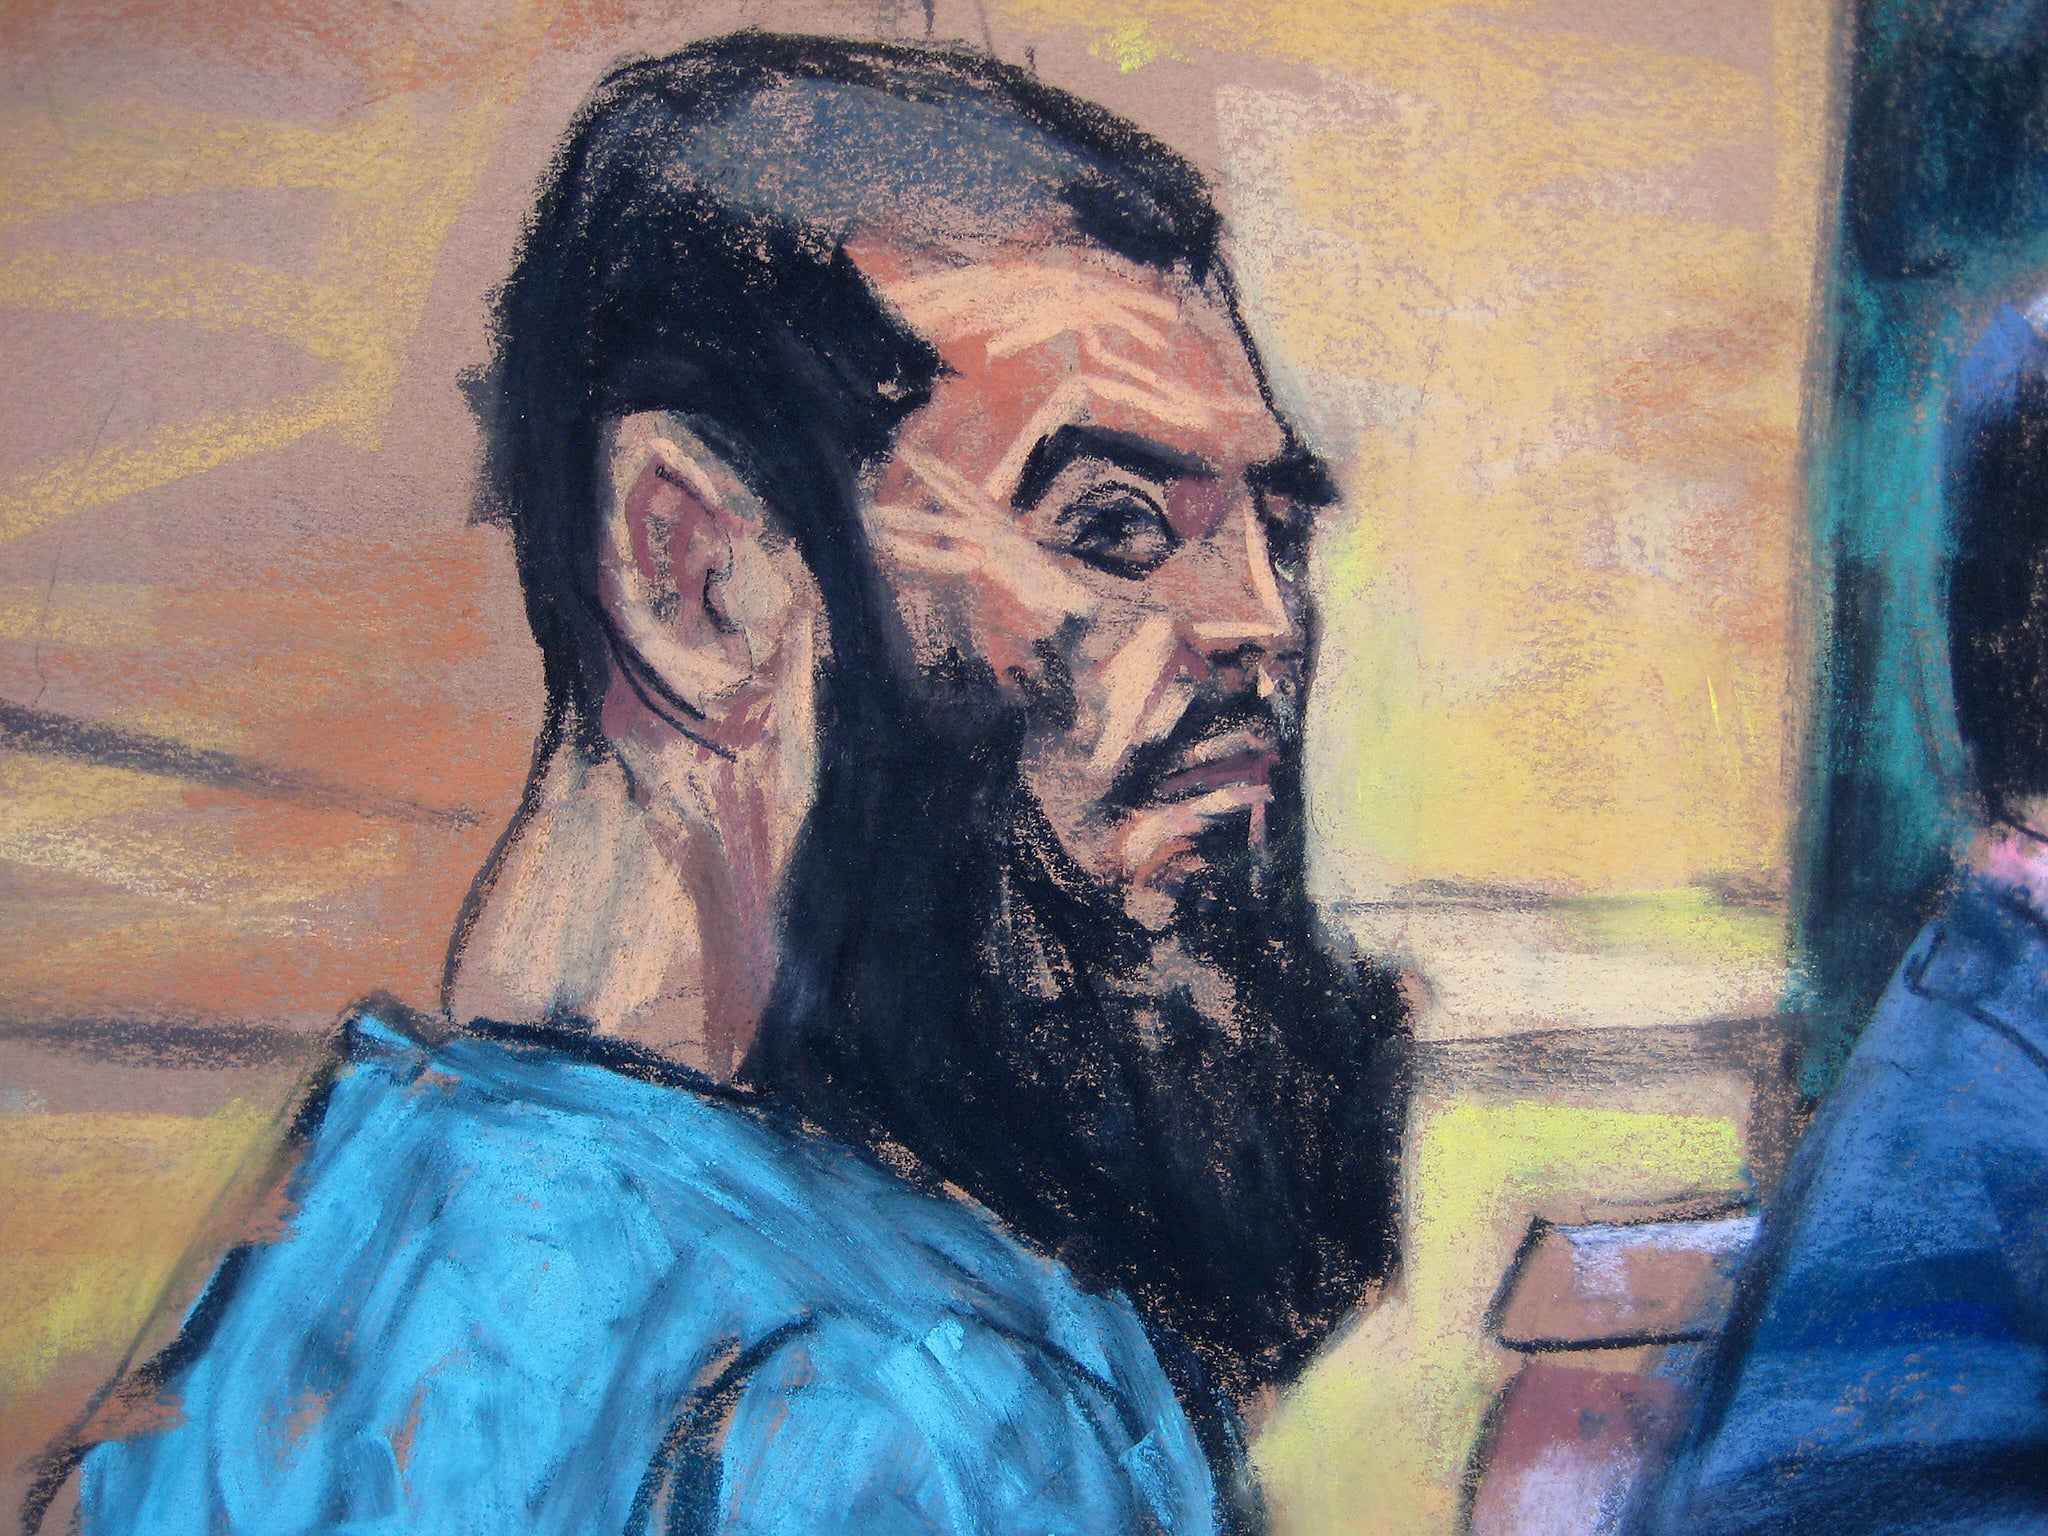 A court sketch of Abdul Naseer at his first hearing in the US in 2013